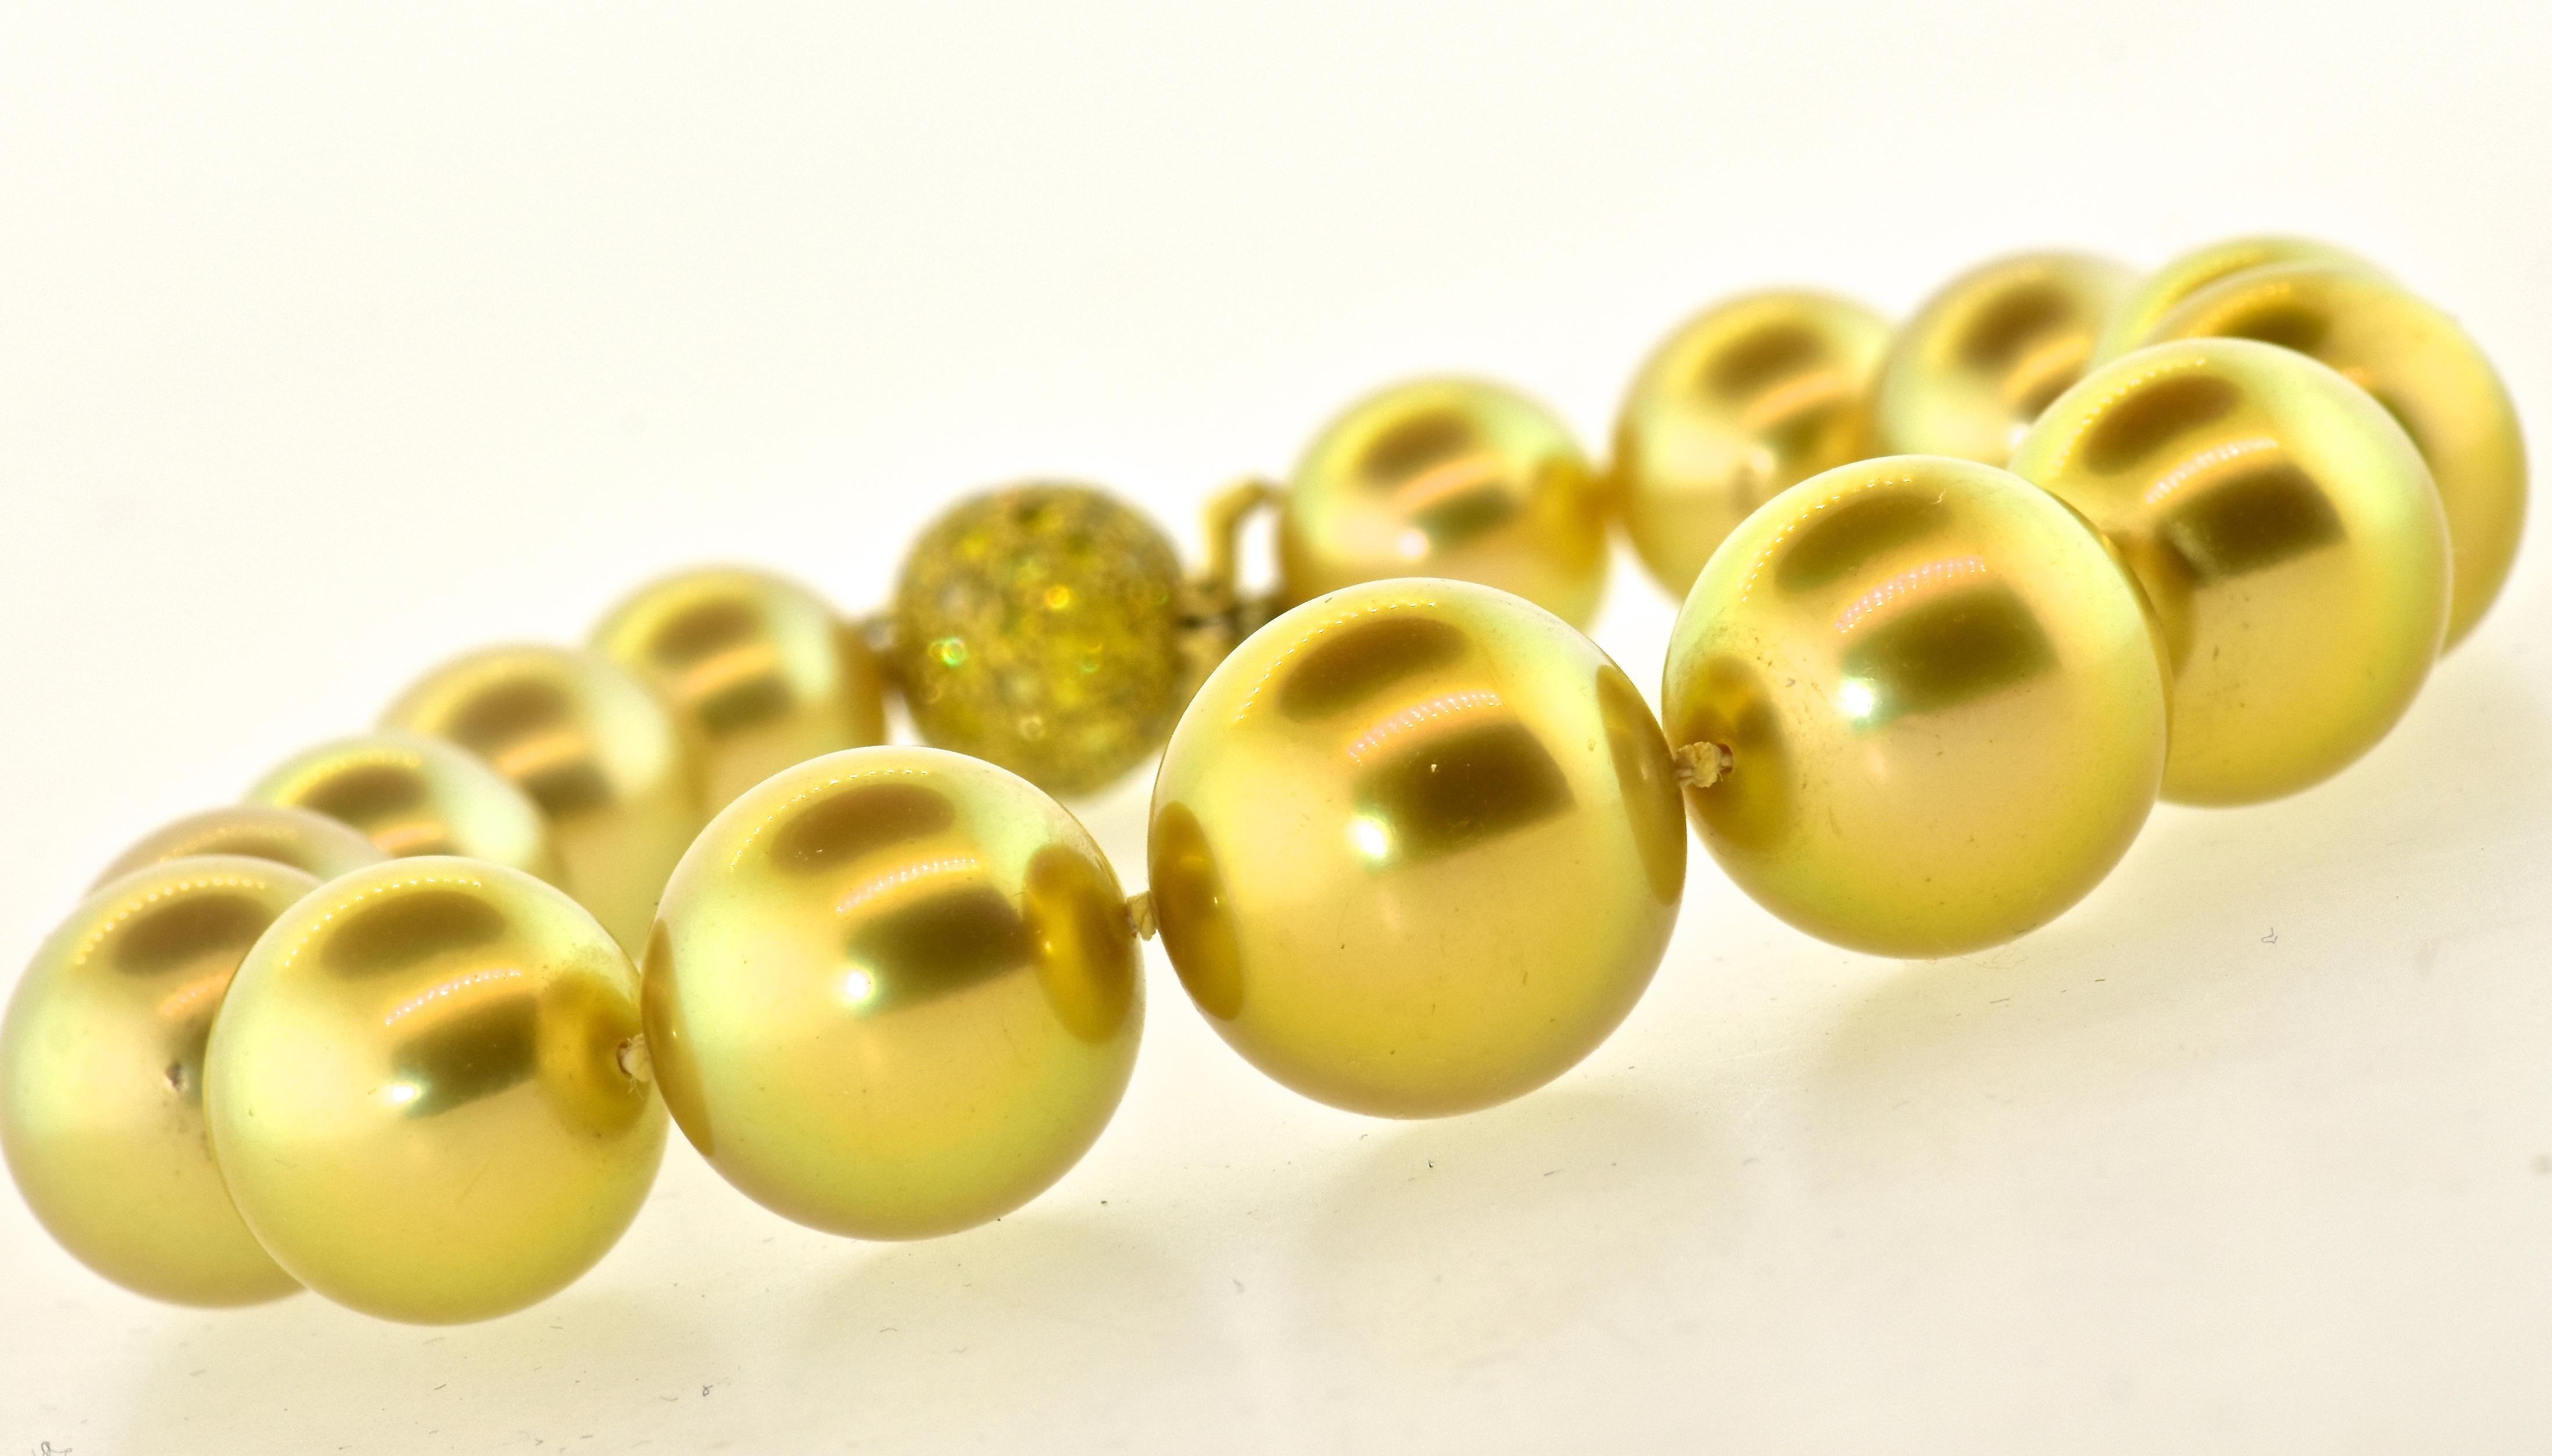 Natural South Sea golden color pearls, 15 true gem natural - not dyed - color, deep golden South Sea pearls slightly graduating in size, from 10.5 up to 14.35 mm.  The color is a vibrant deep gold color, the skins are very clean (no blemishes) with